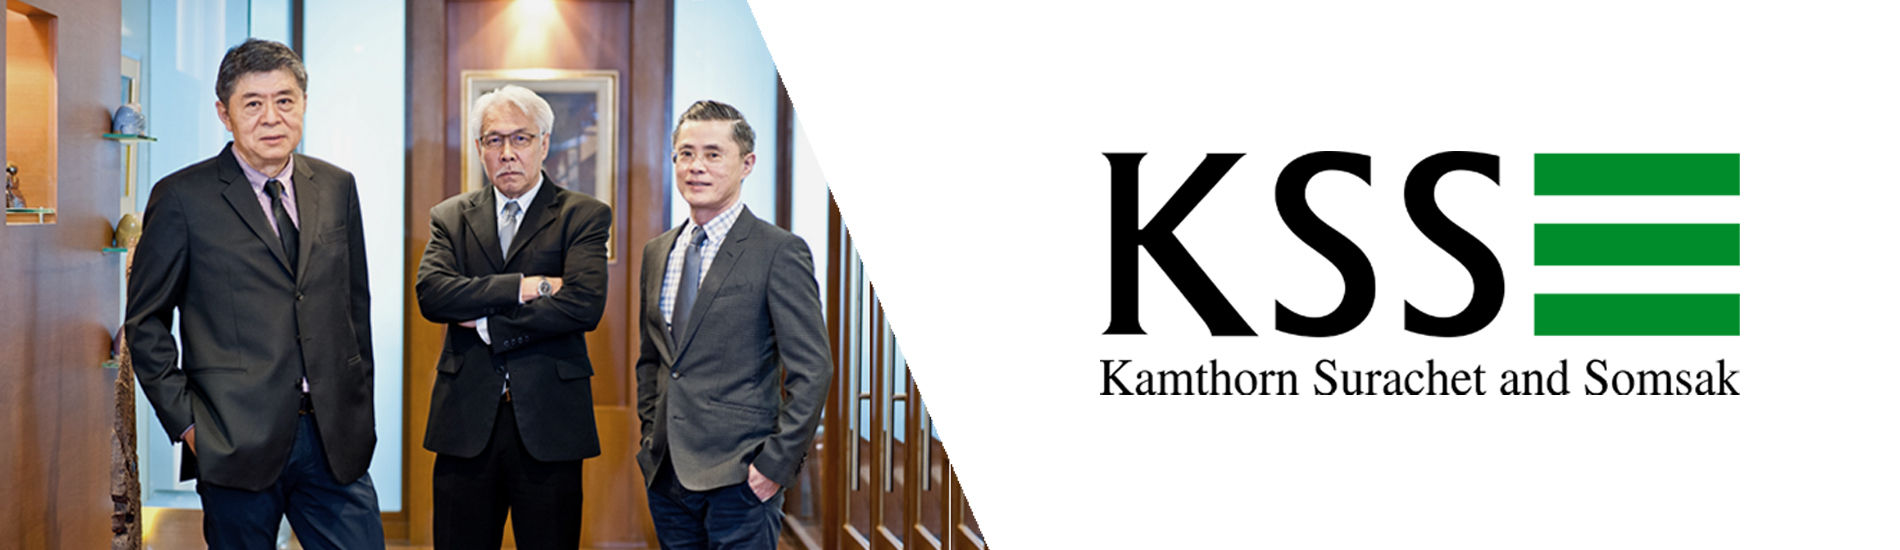 Trusted Legal Service Provider for International Clients in Thailand